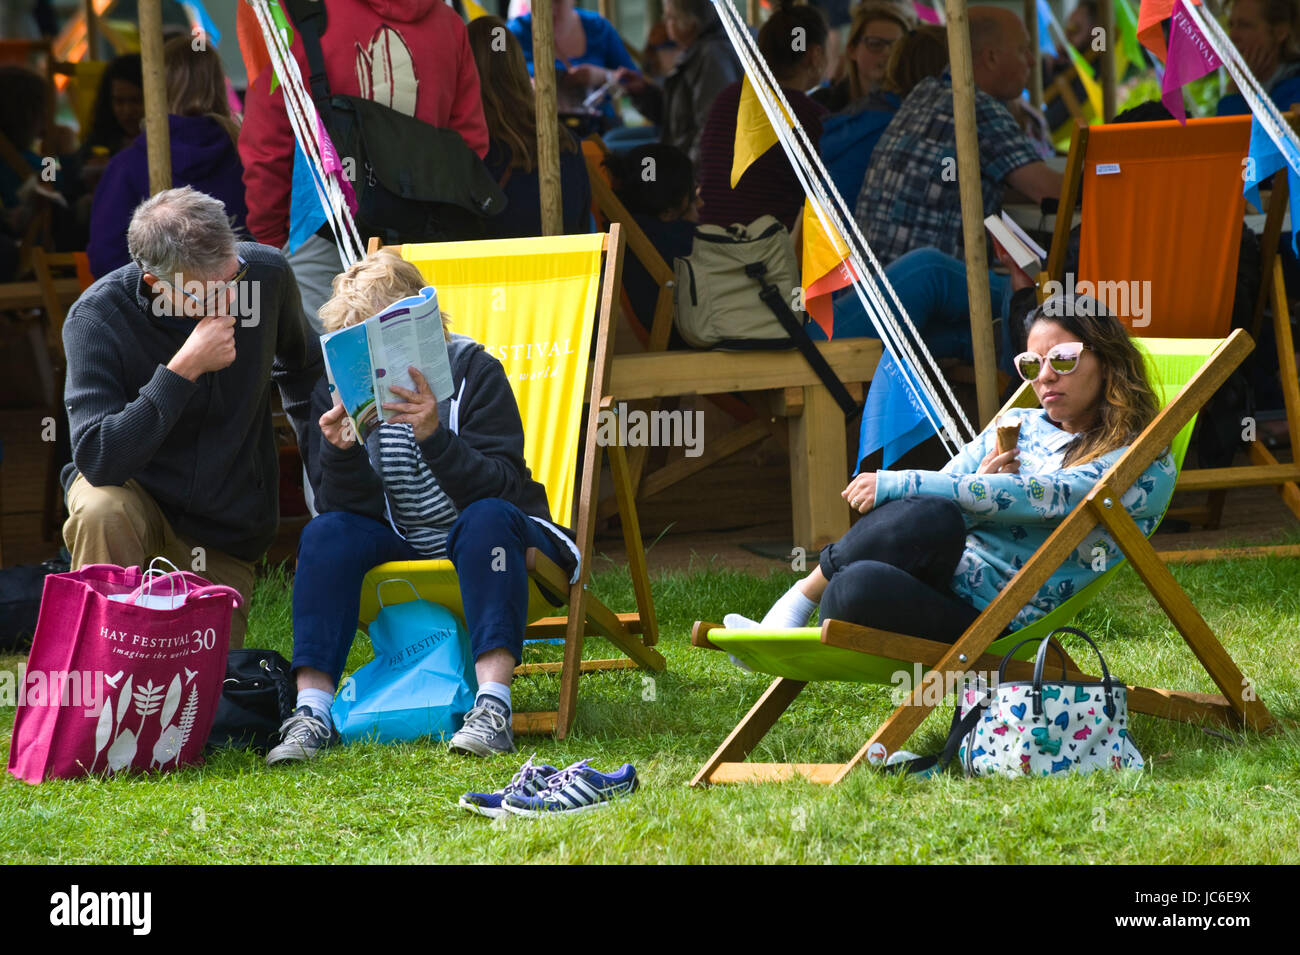 Woman eating ice cream & other visitors relaxing in deckchairs at Hay Festival 2017 Hay-on-Wye Powys Wales UK Stock Photo